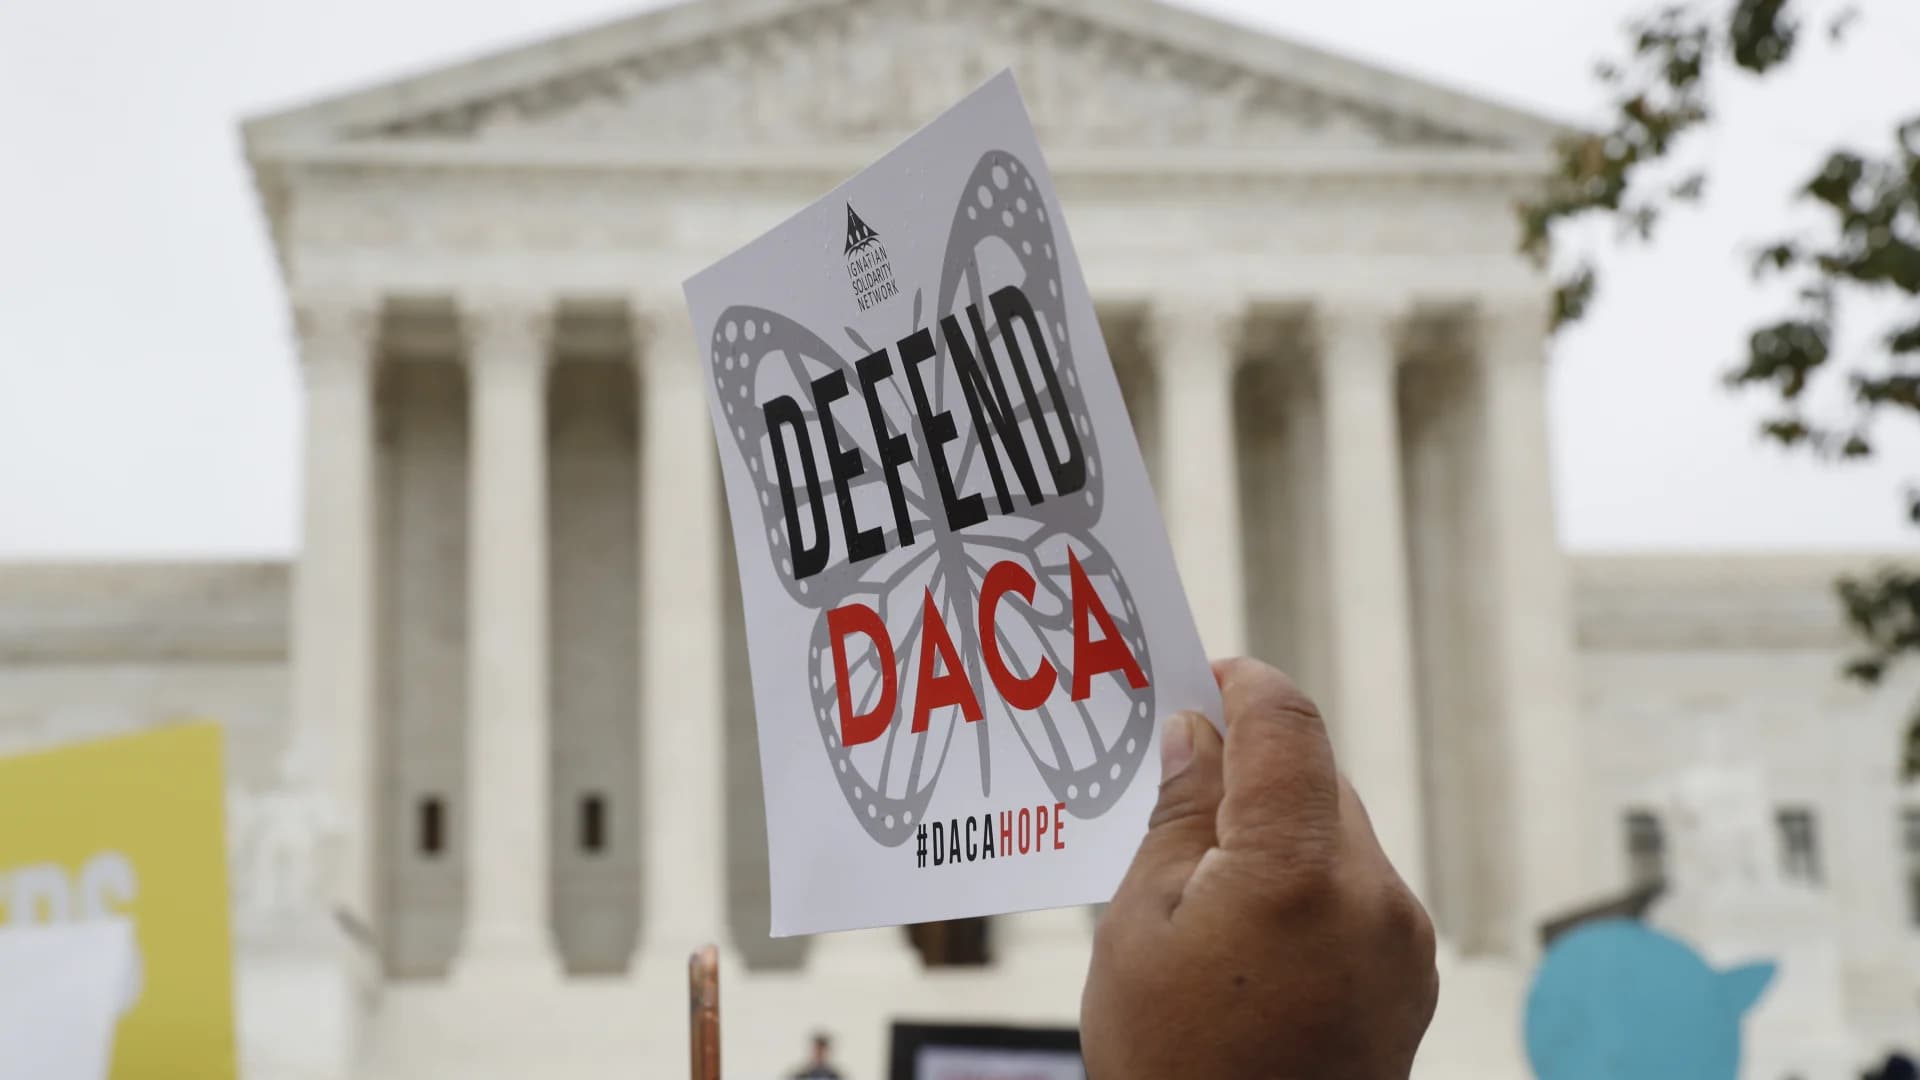 Judge orders end to DACA, current enrollees safe for now